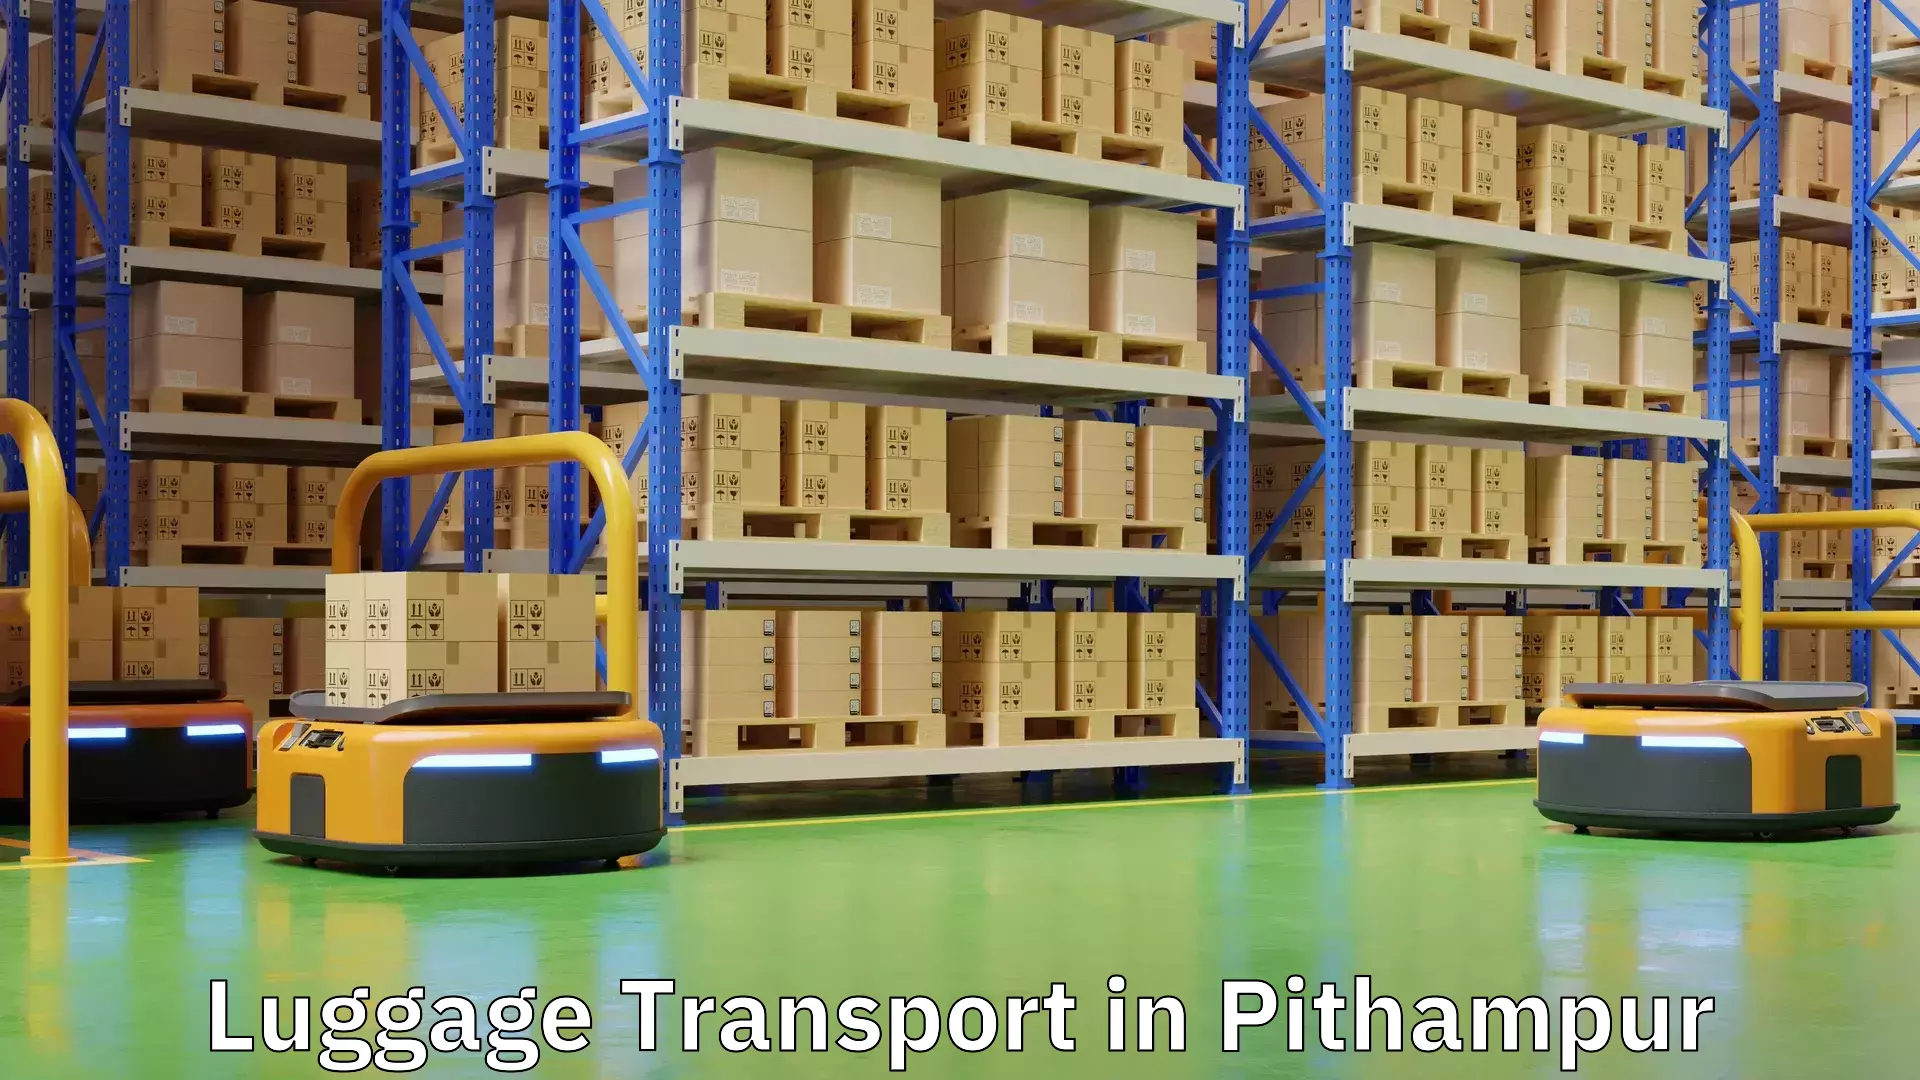 Luggage delivery logistics in Pithampur